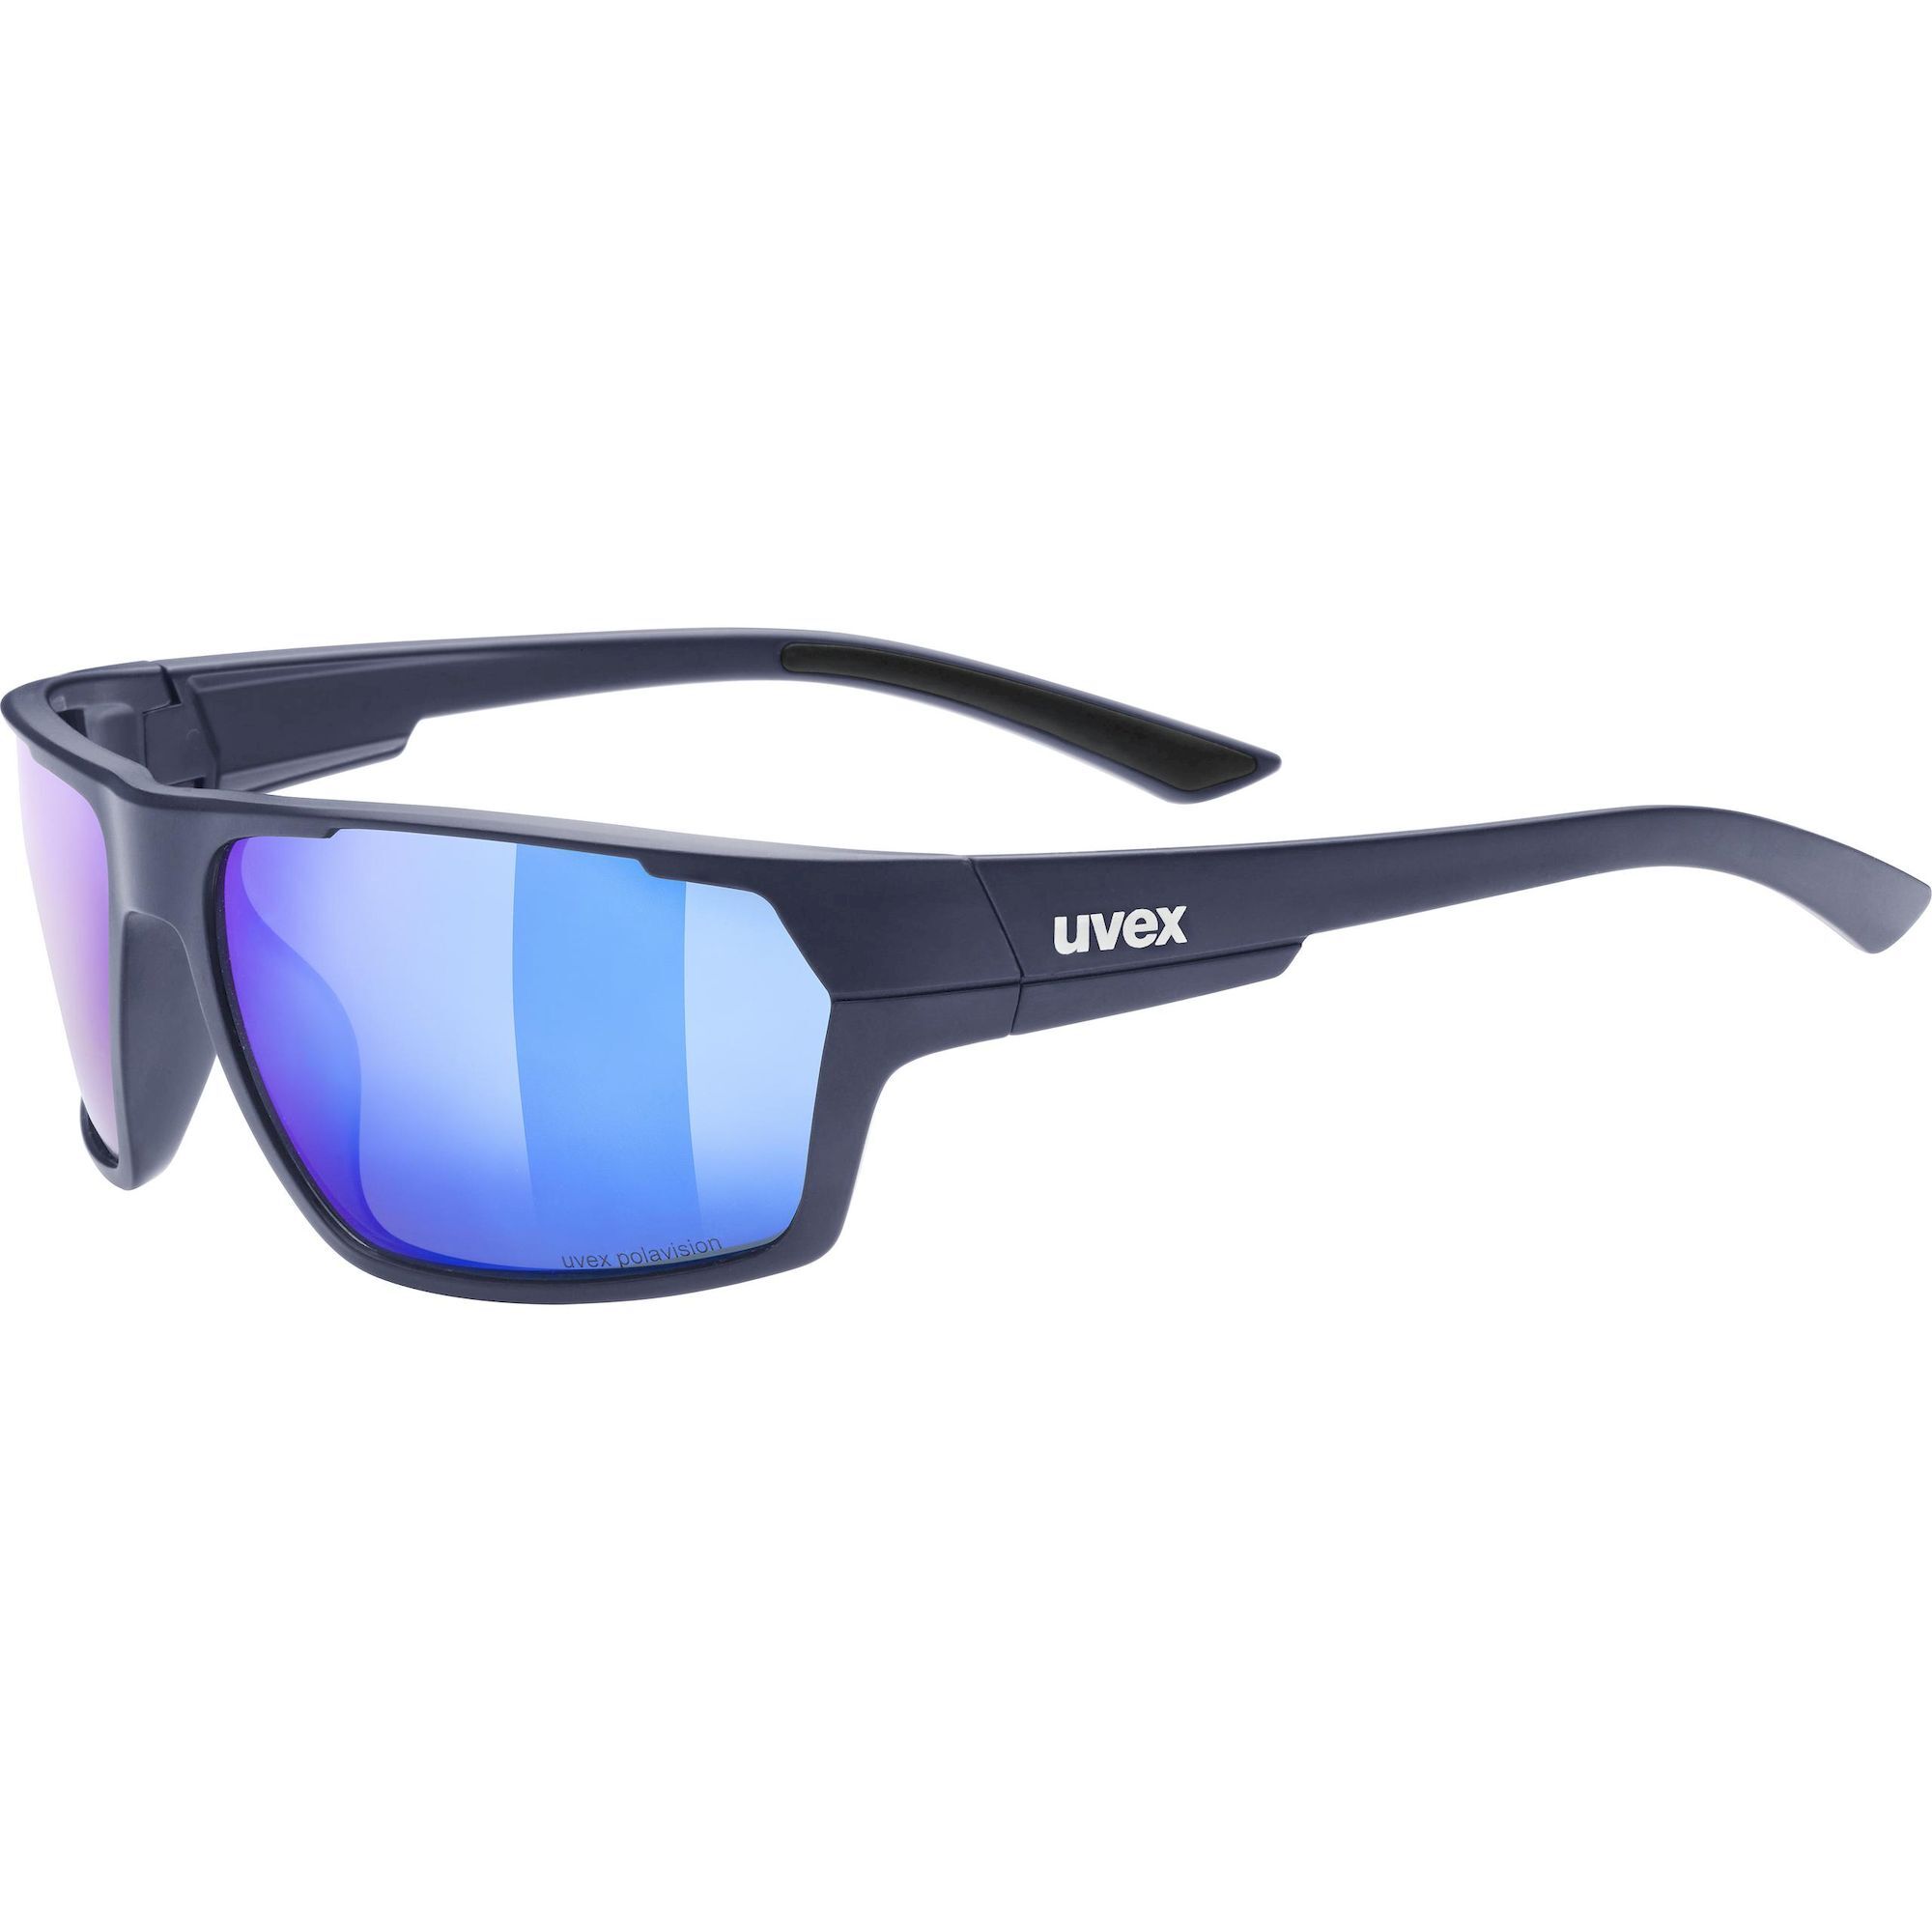 Uvex Sportstyle 233 P - Cycling sunglasses